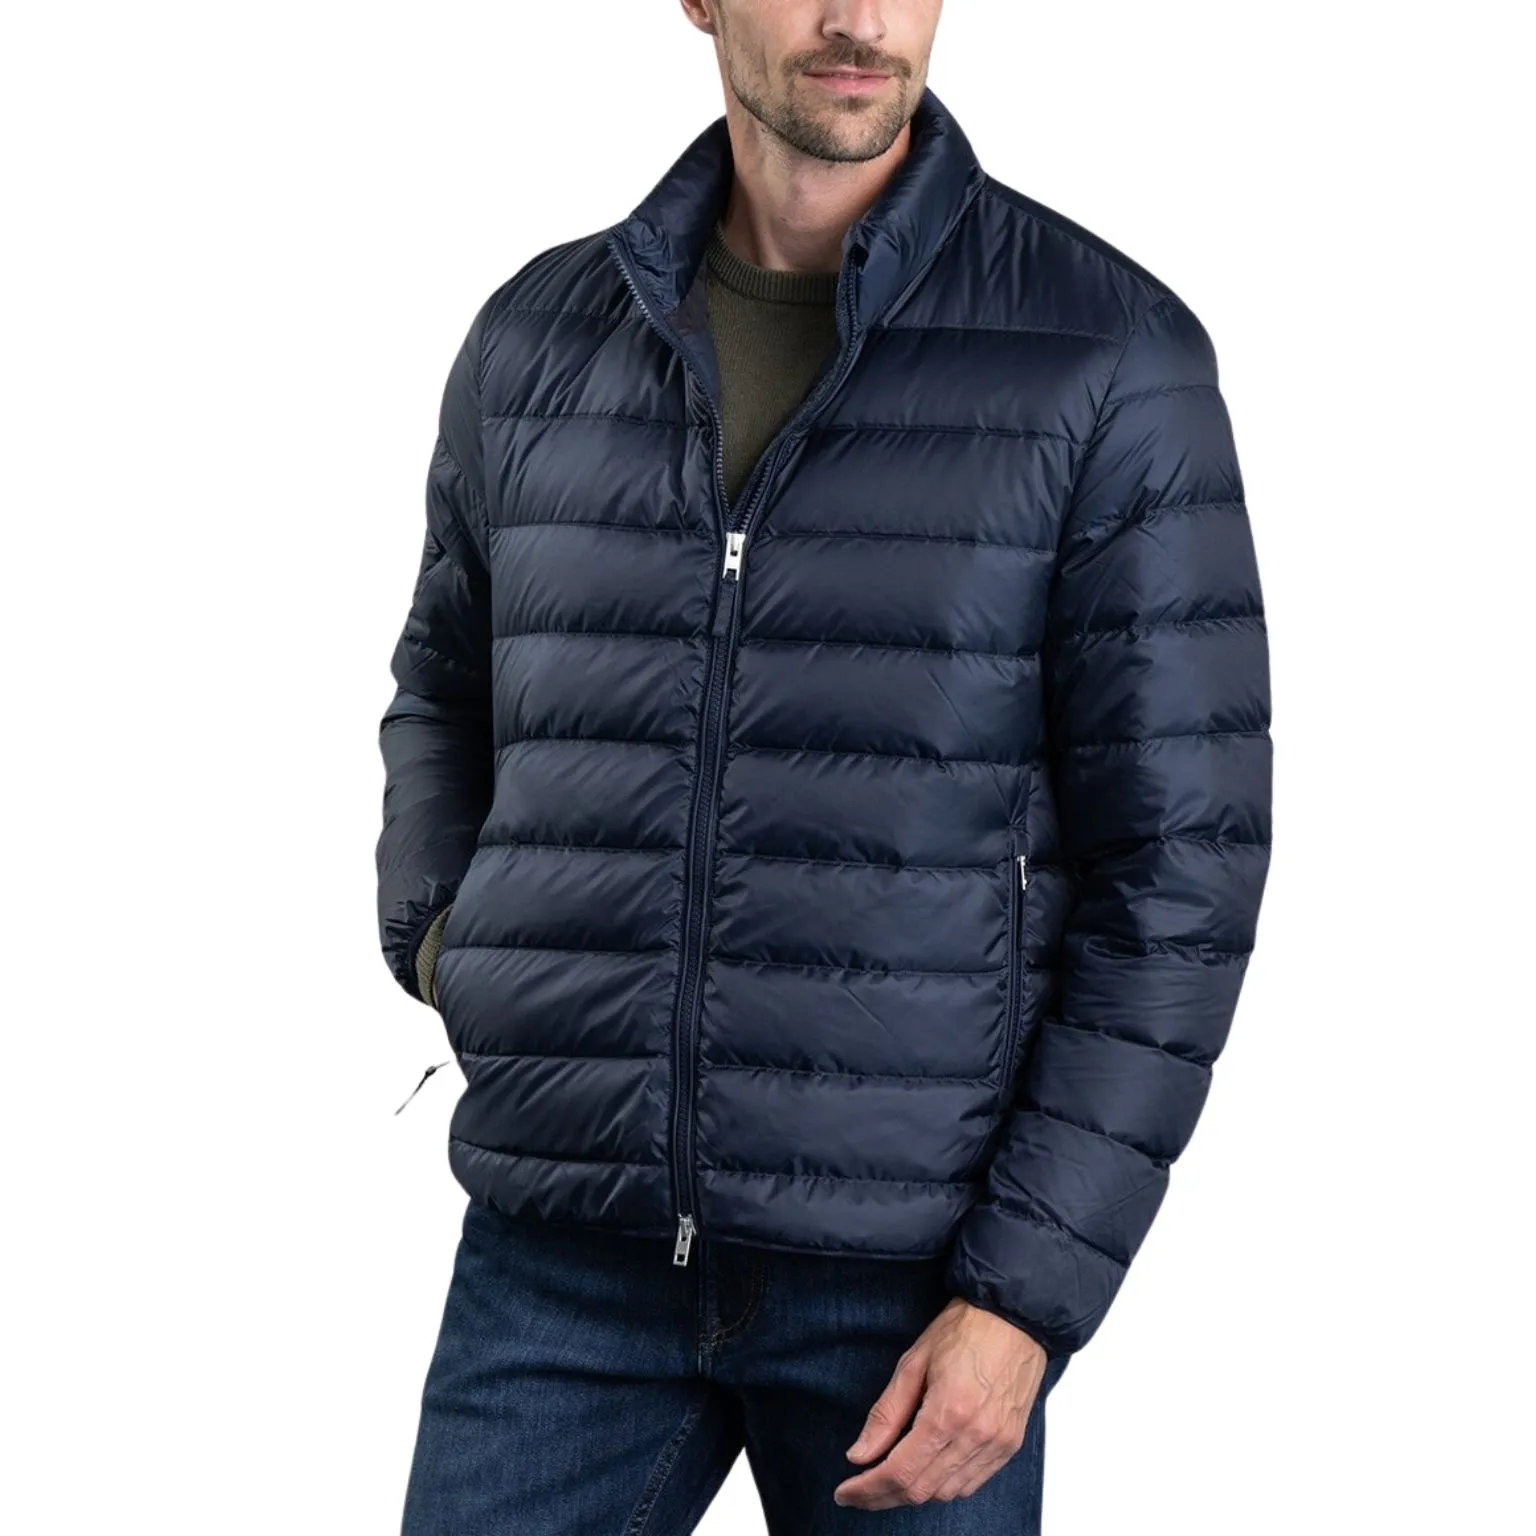 Light Down Jacket Manufacturing with superior quality